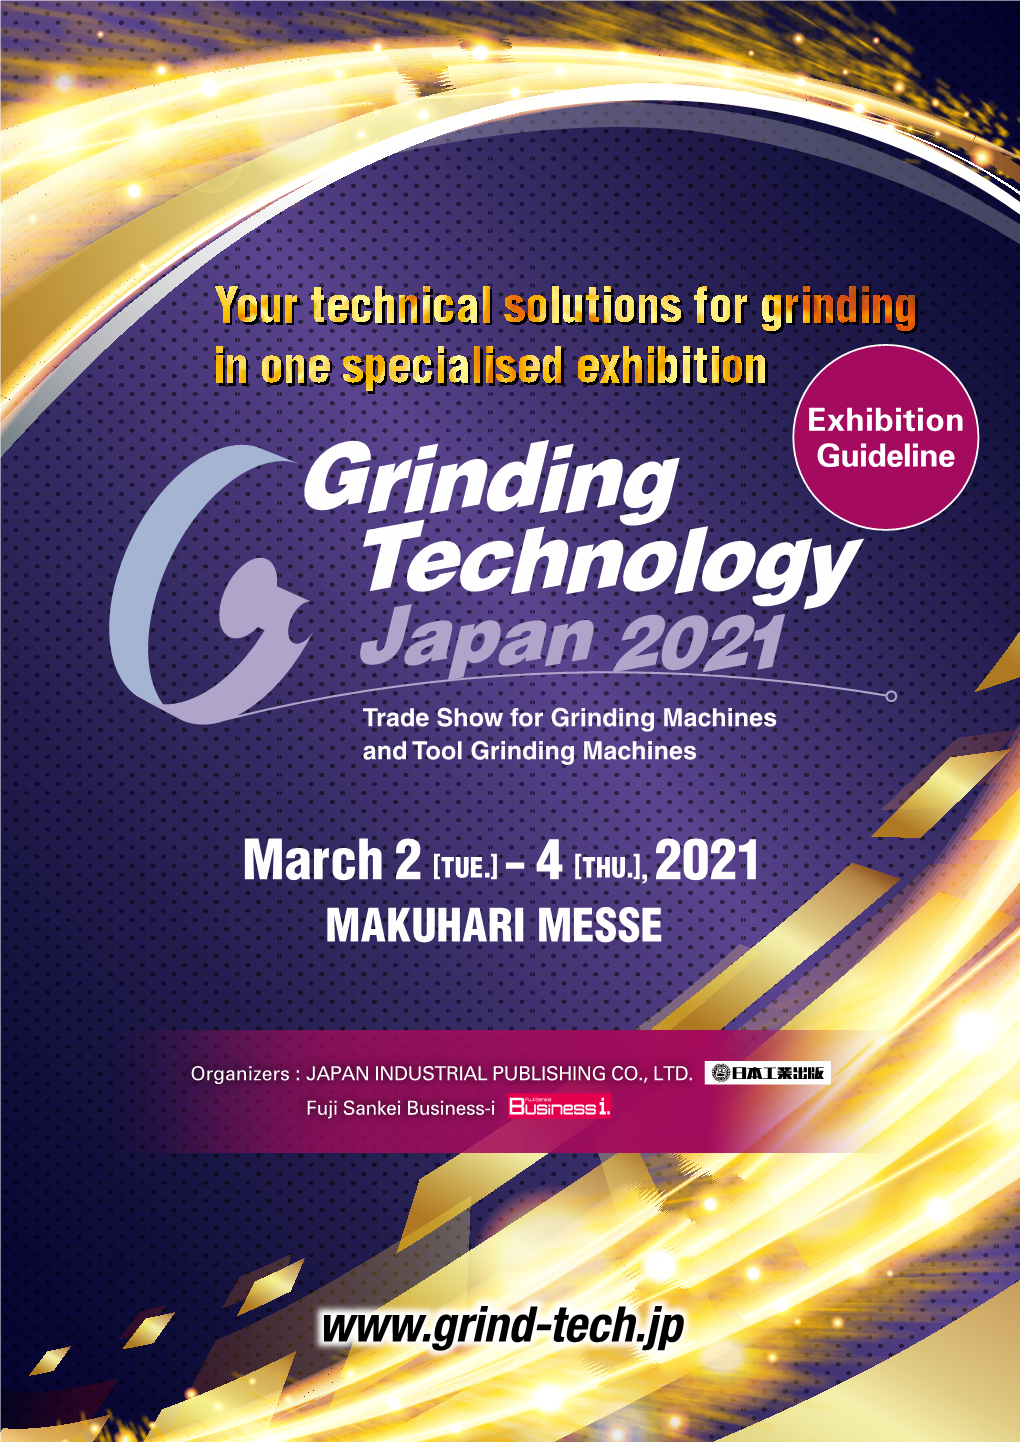 Grinding Technology Japan 2021 Trade Show for Grinding Machines and Tool Grinding Machines